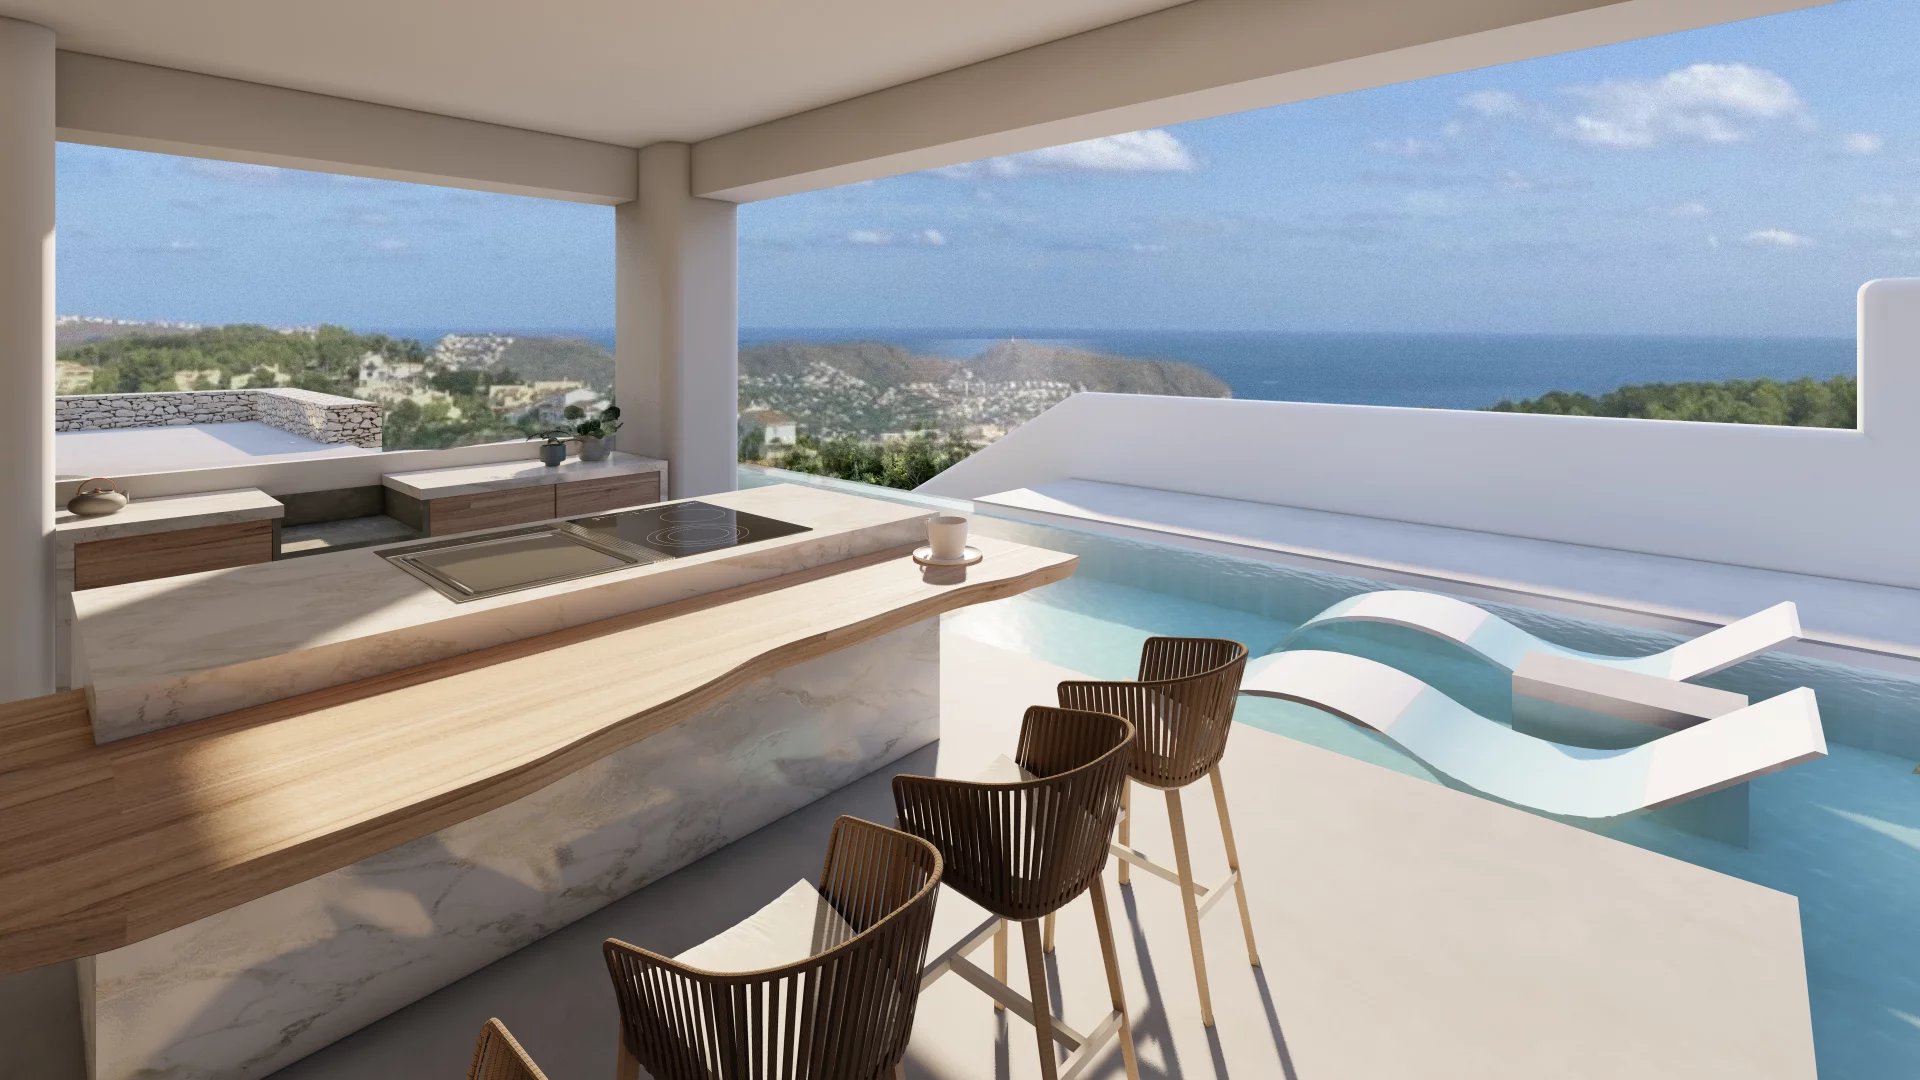 Superb Ibiza style villa with panoramic sea view, under construction in Moraira